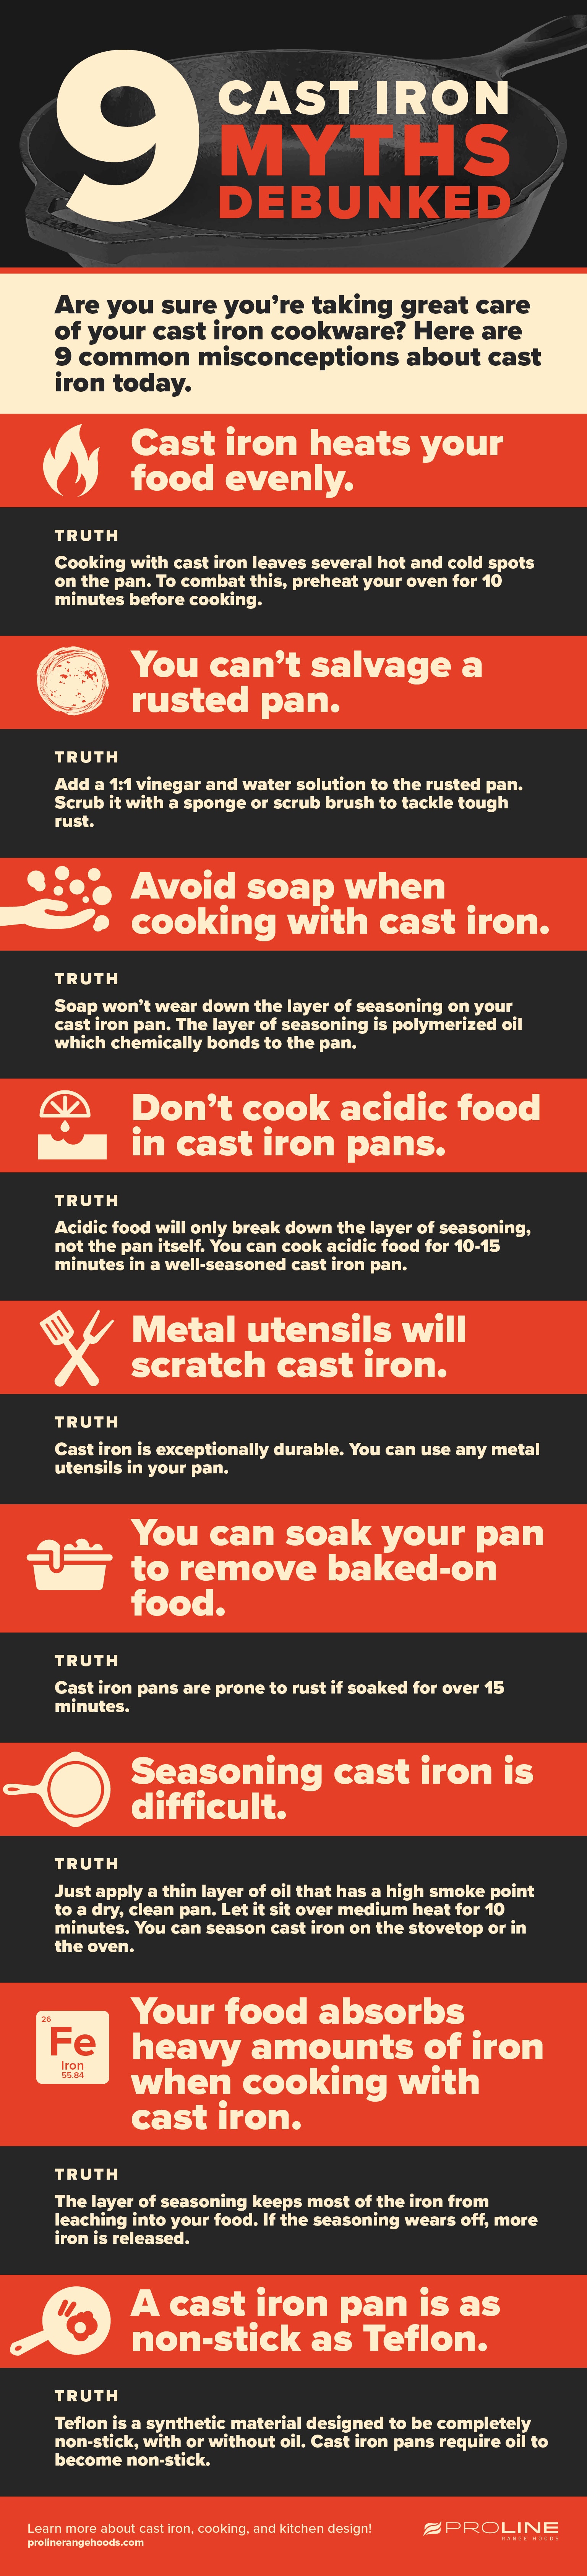 9 Cast Iron Myths Debunked infographic